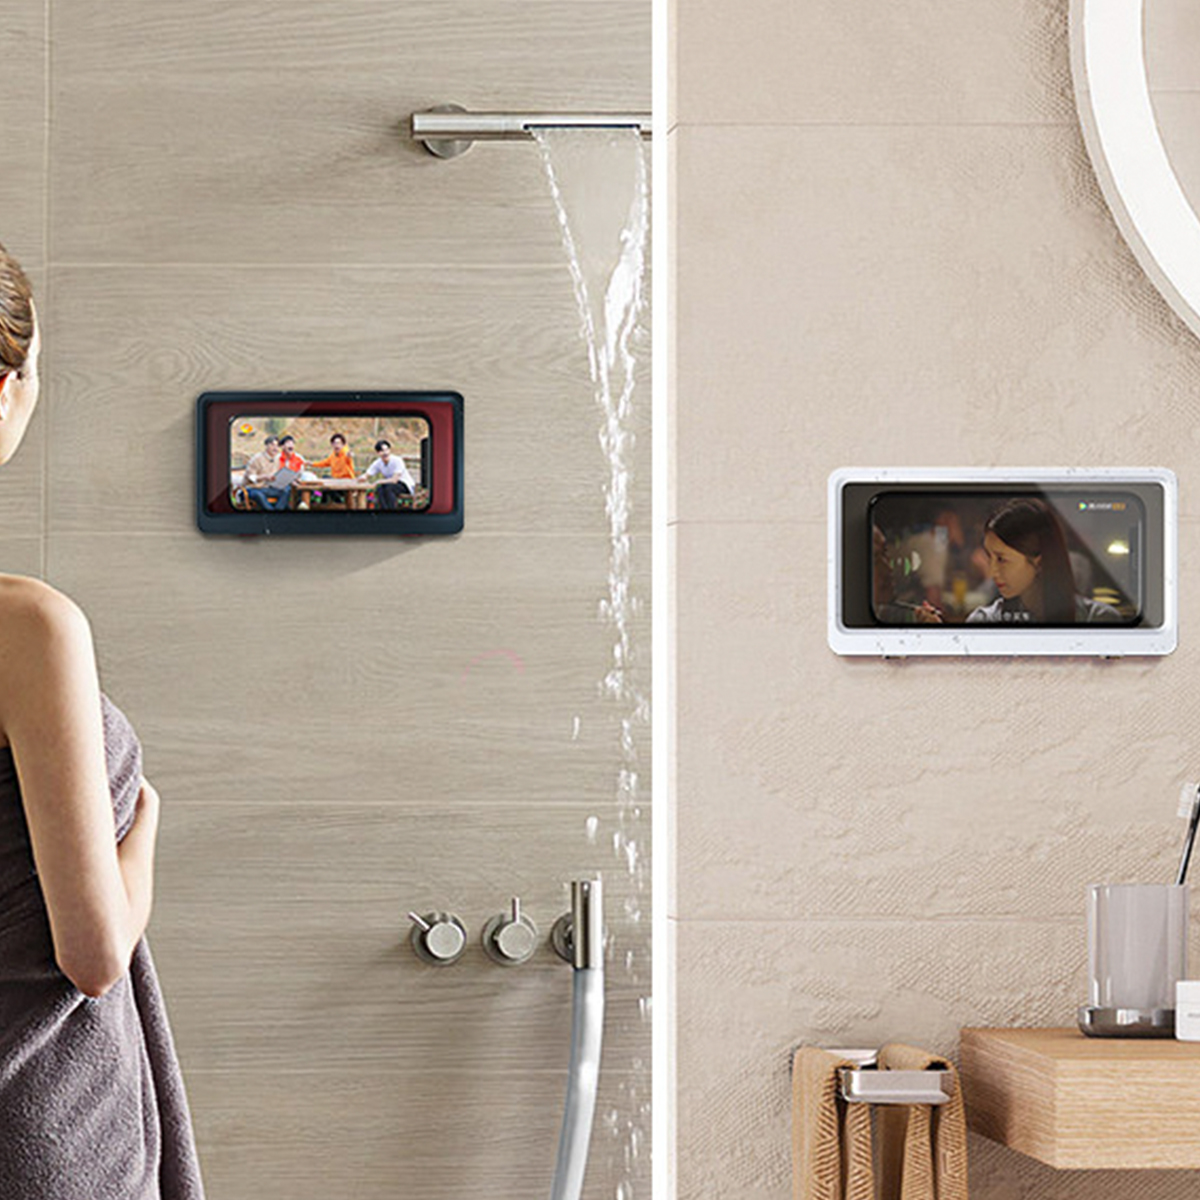 Bathroom-Waterproof-Touch-Screen-Mobile-Cell-Phone-Holder-Case-Wall-Mount-Storage-Box-Under-68-inche-1750862-13